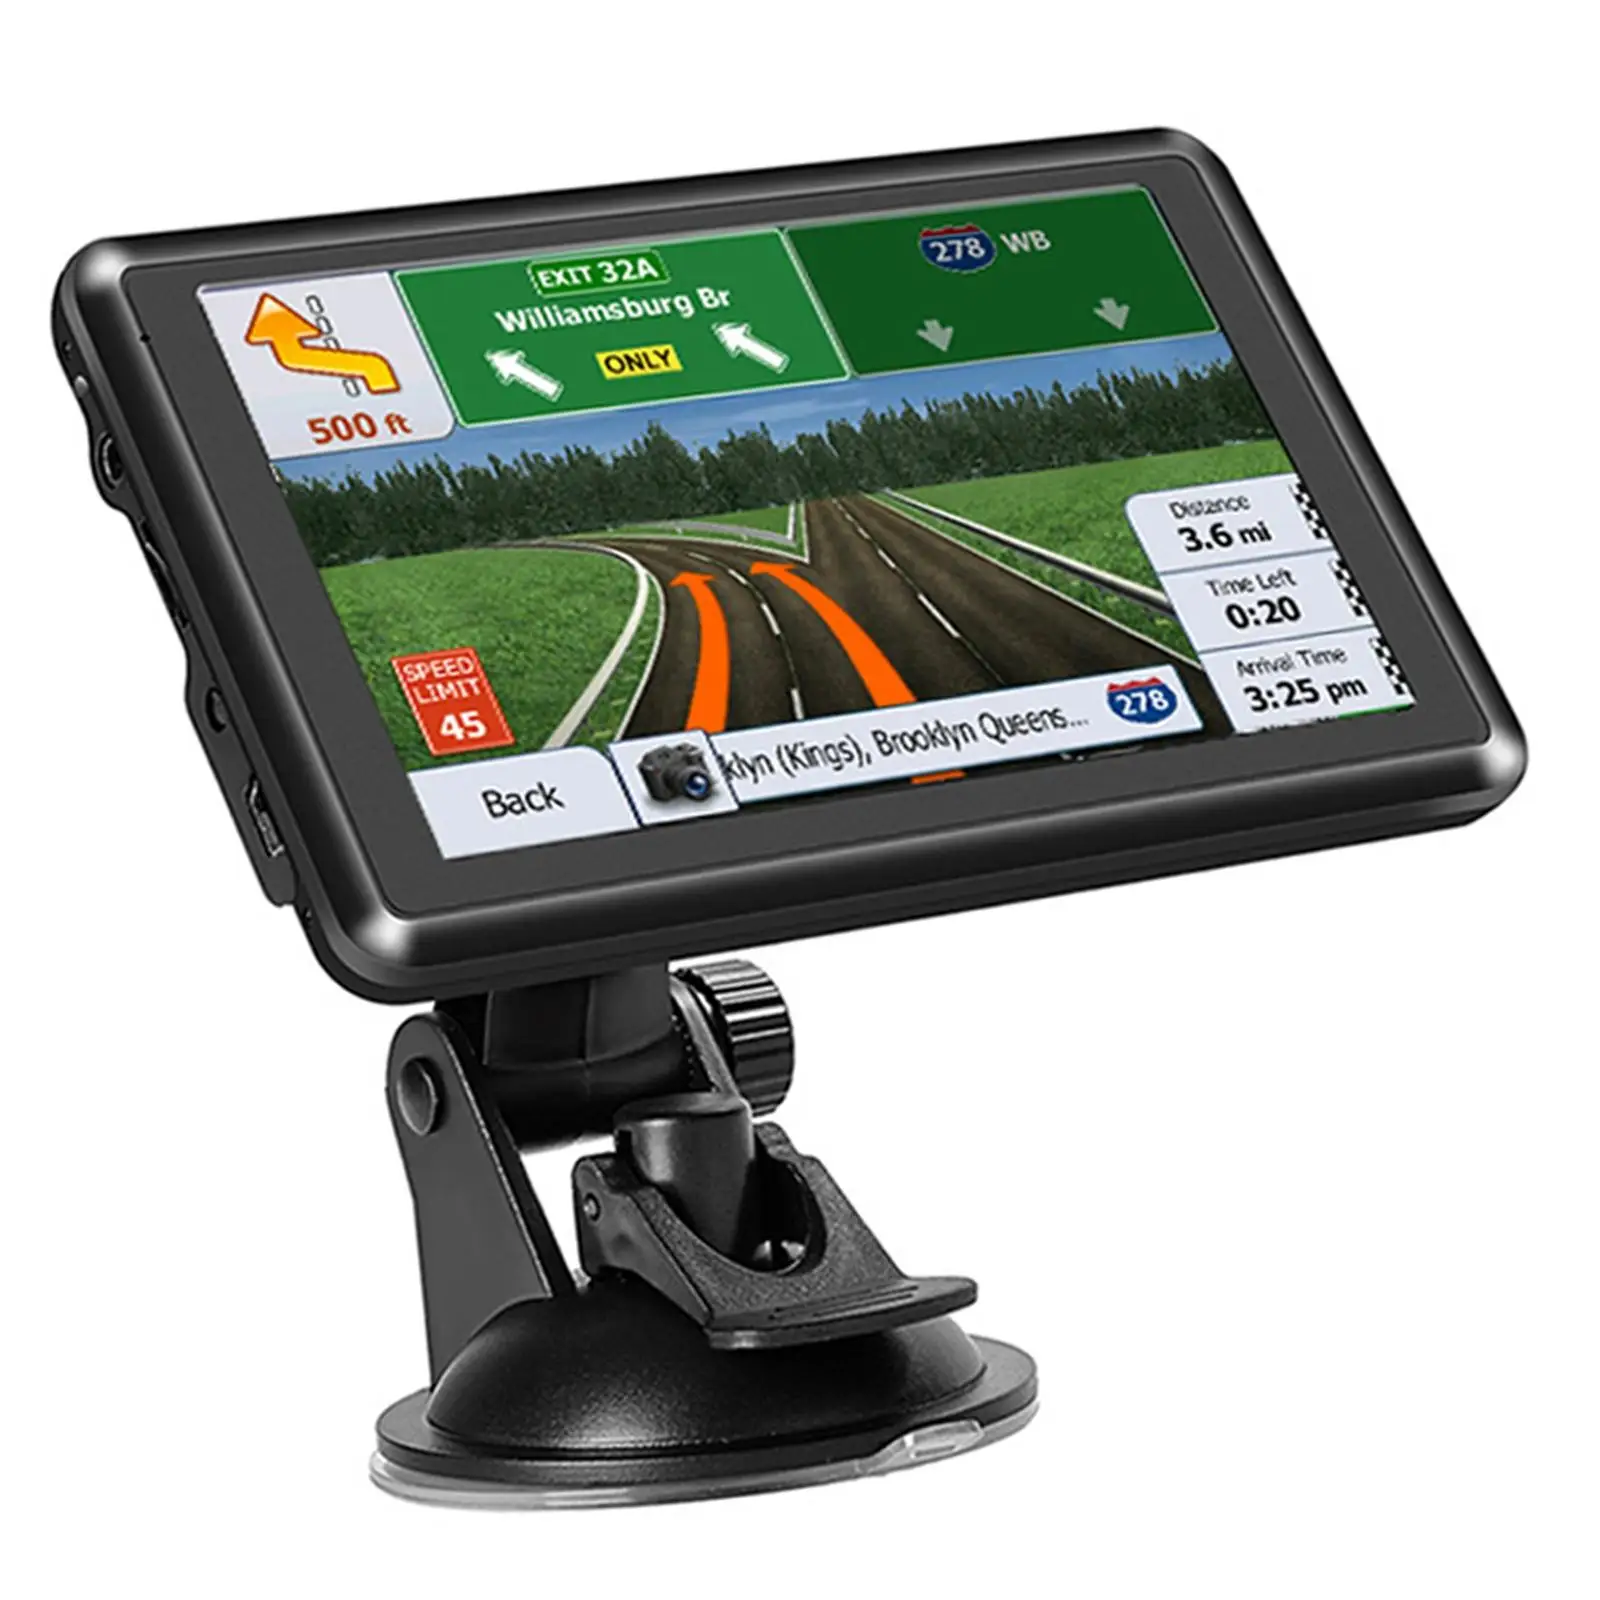 GPS Device 5 inch Touch Screen Driving Alert Spoken Direction High Resolution Maps 8GB 128 MB FM Satellite GPS Navigator